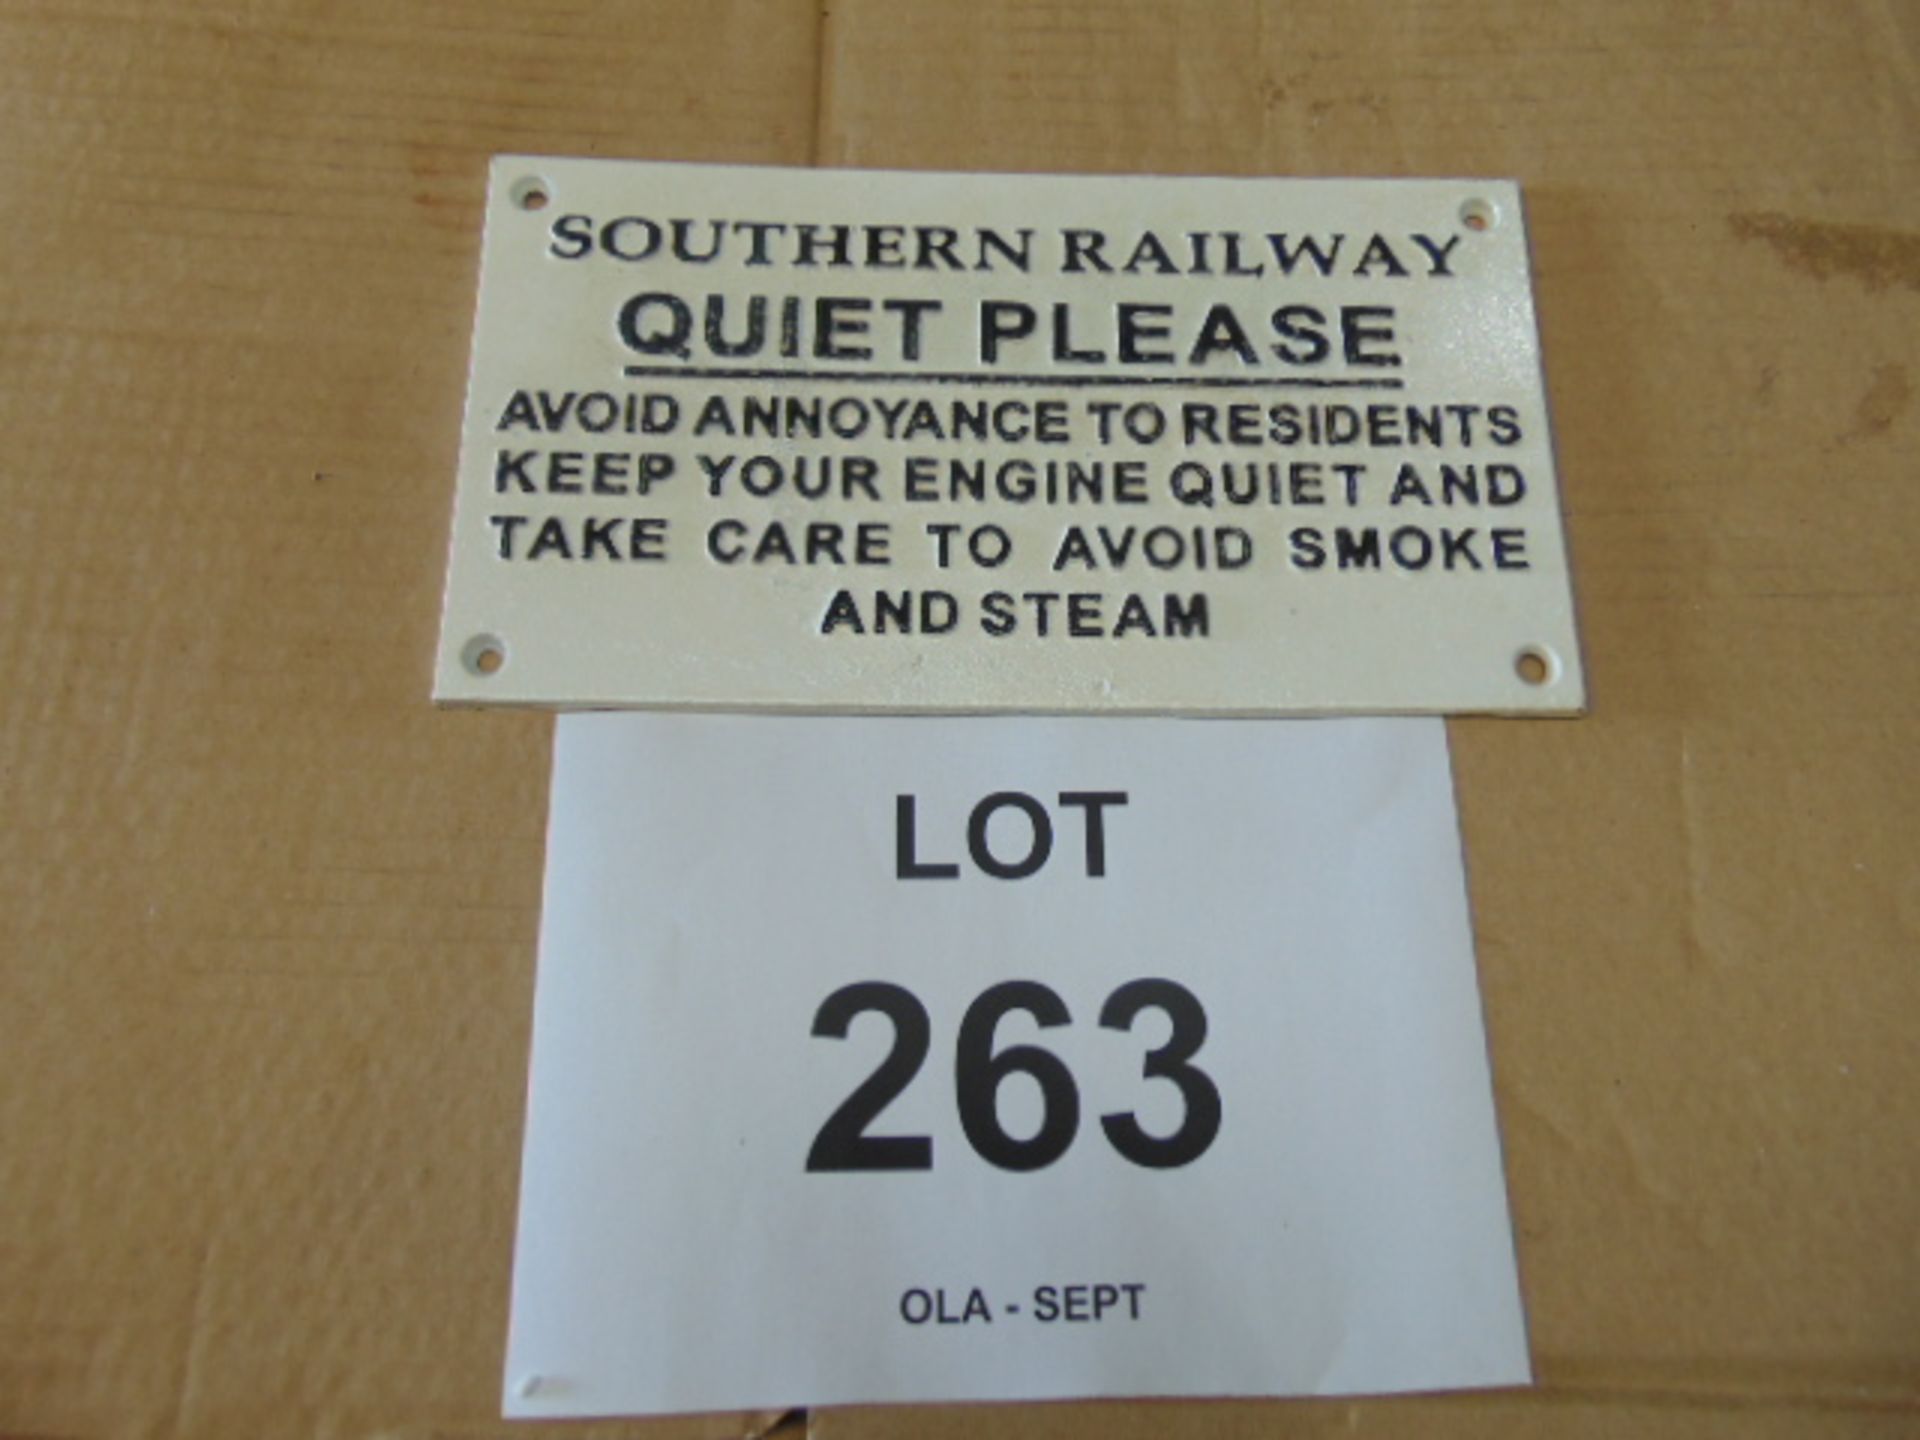 SOUTHERN RAILWAY CAST IRON SIGN - 27cms x 15cms - Image 2 of 3